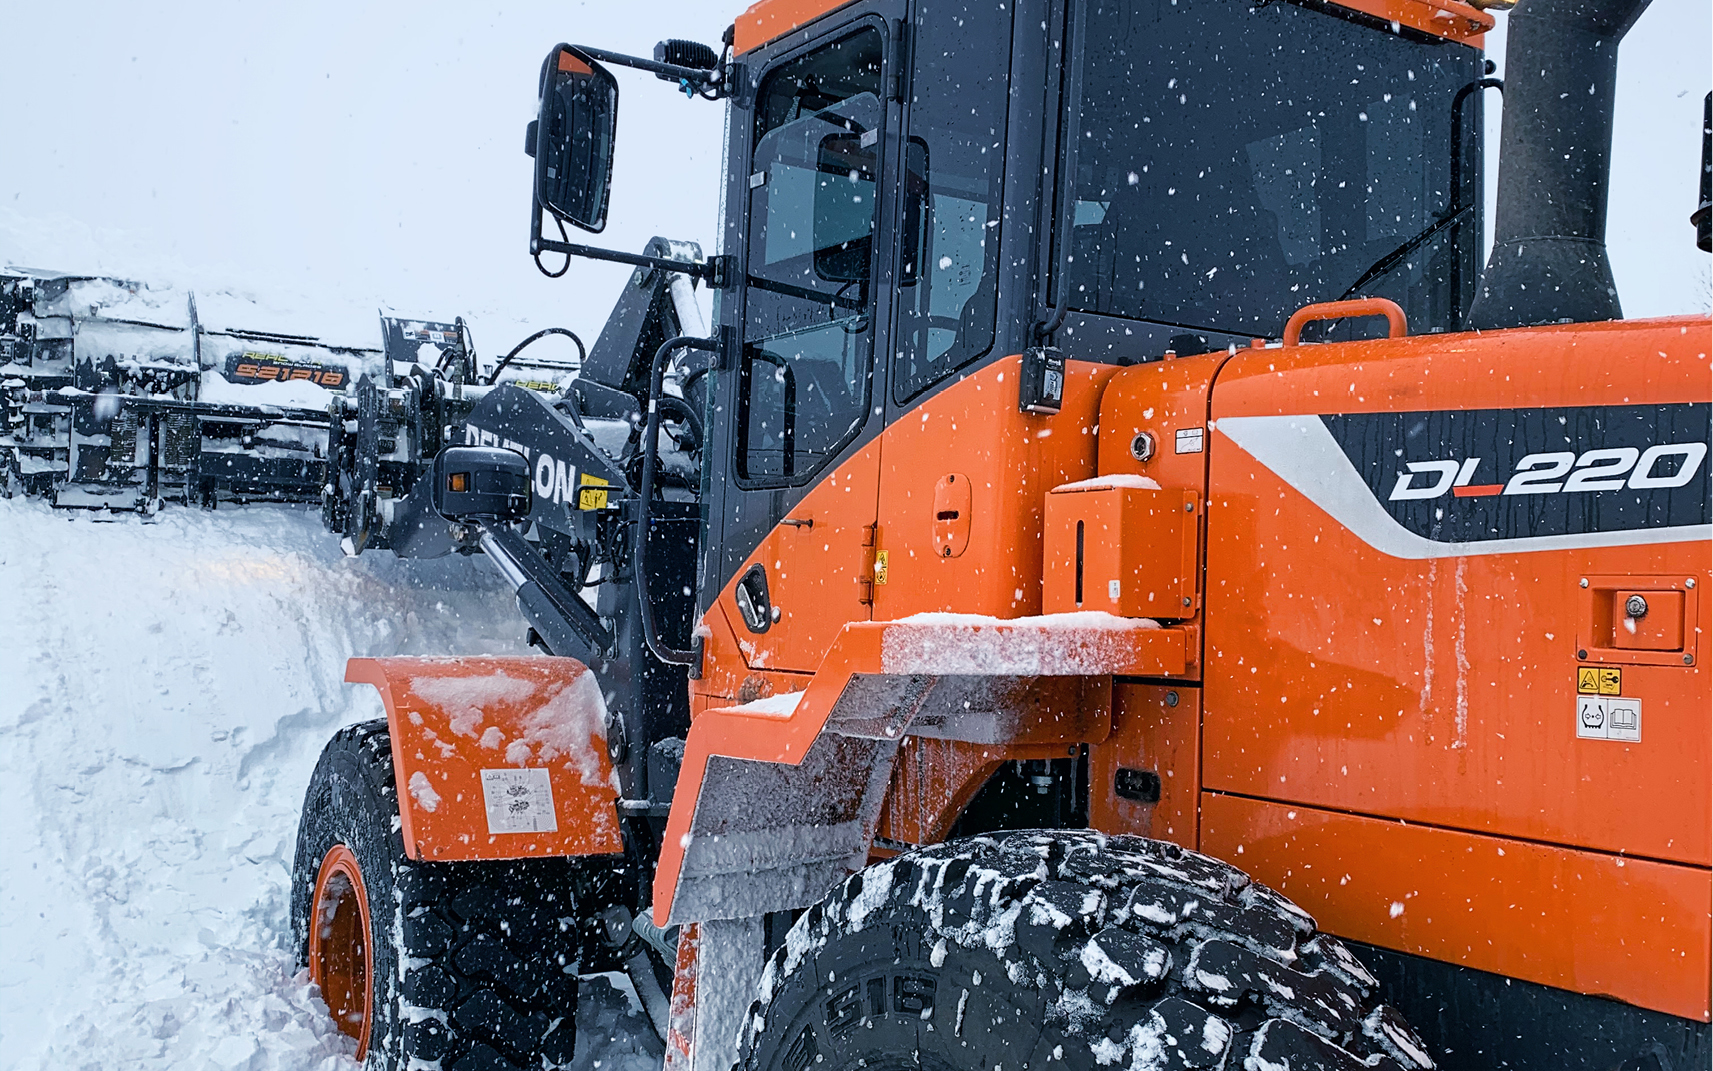 A DL220 wheel loader pushing snow using a snow pusher attachment.